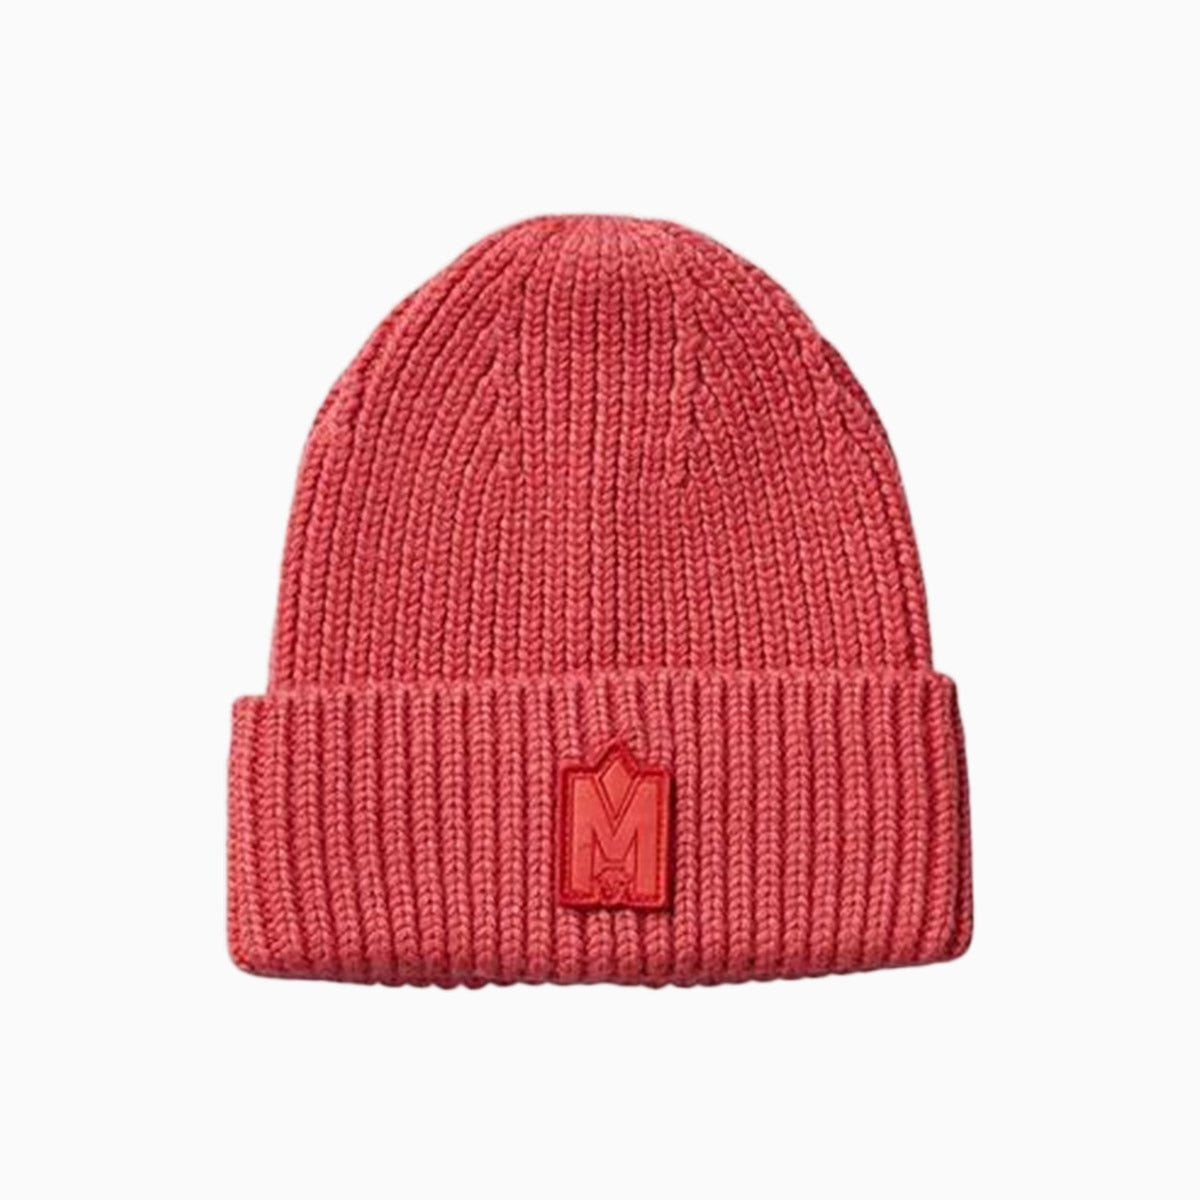 mackage-jude-m-hand-knit-toque-with-ribbed-cuff-beanie-hat-jude-m-punch